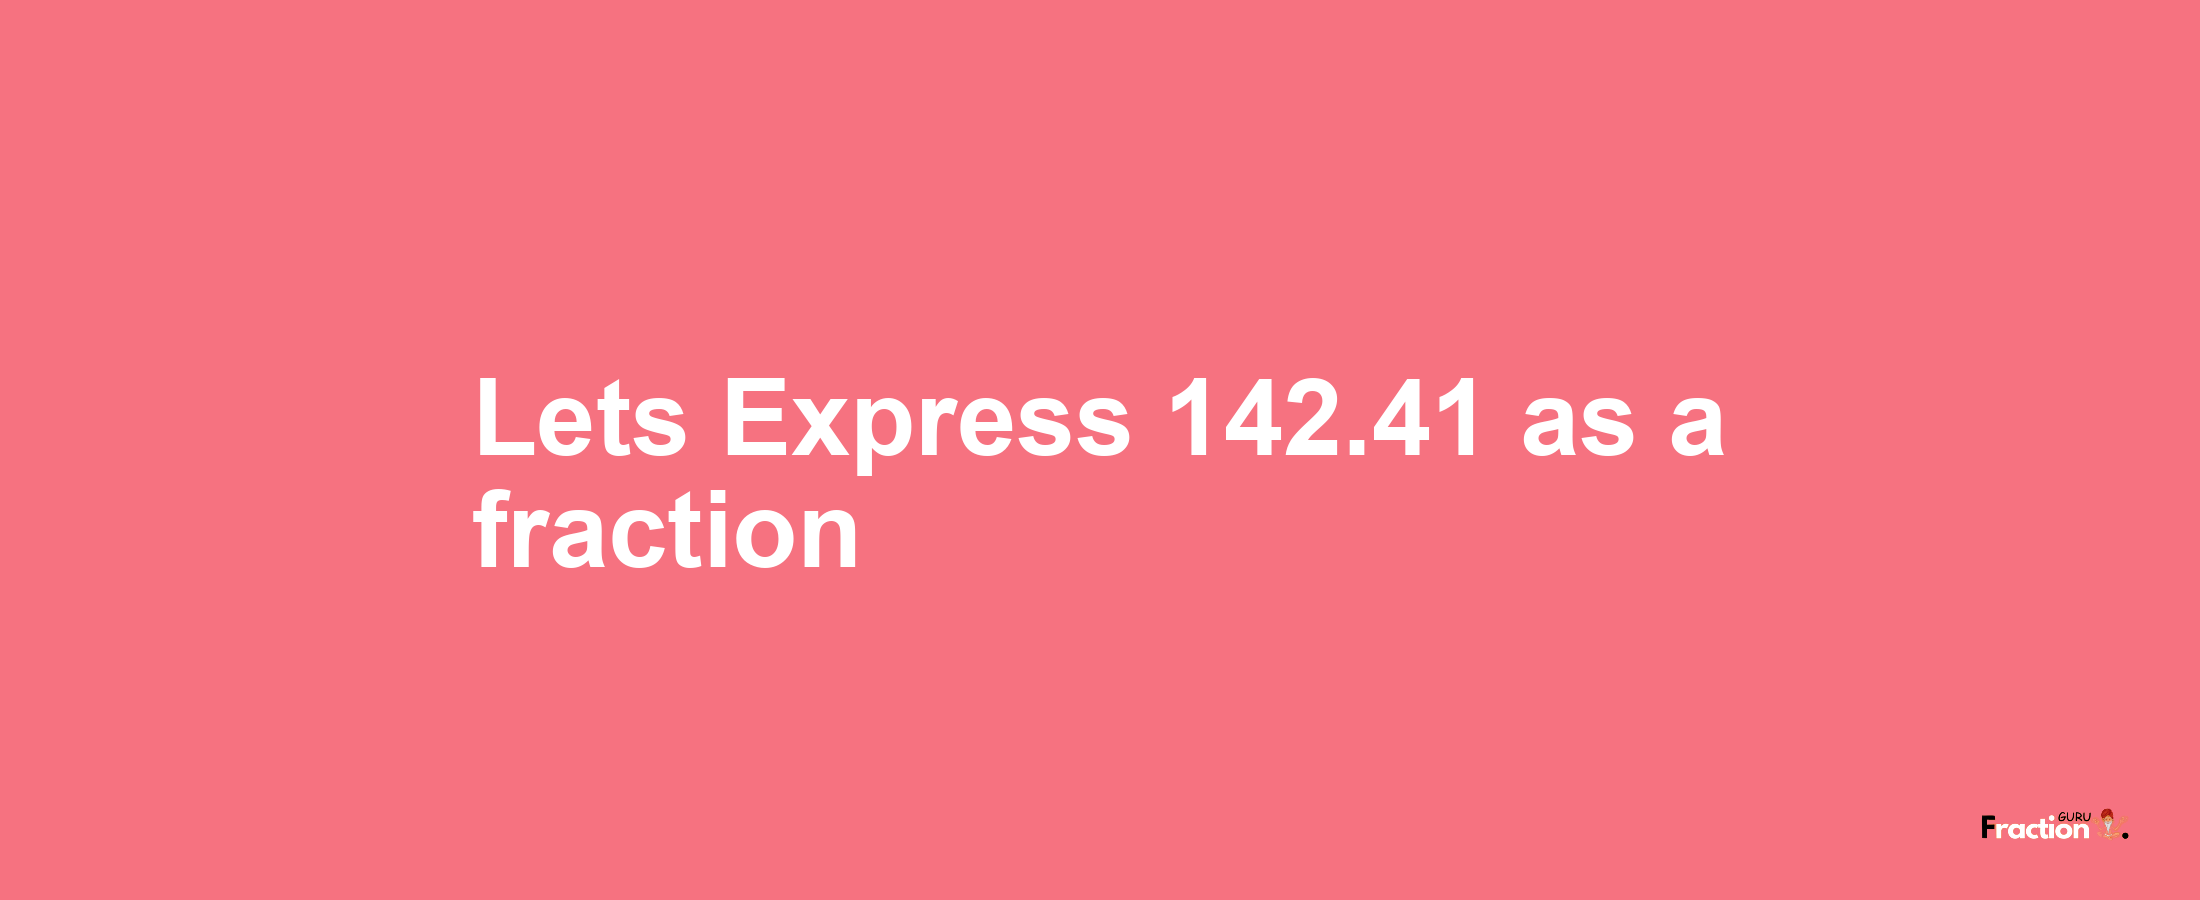 Lets Express 142.41 as afraction